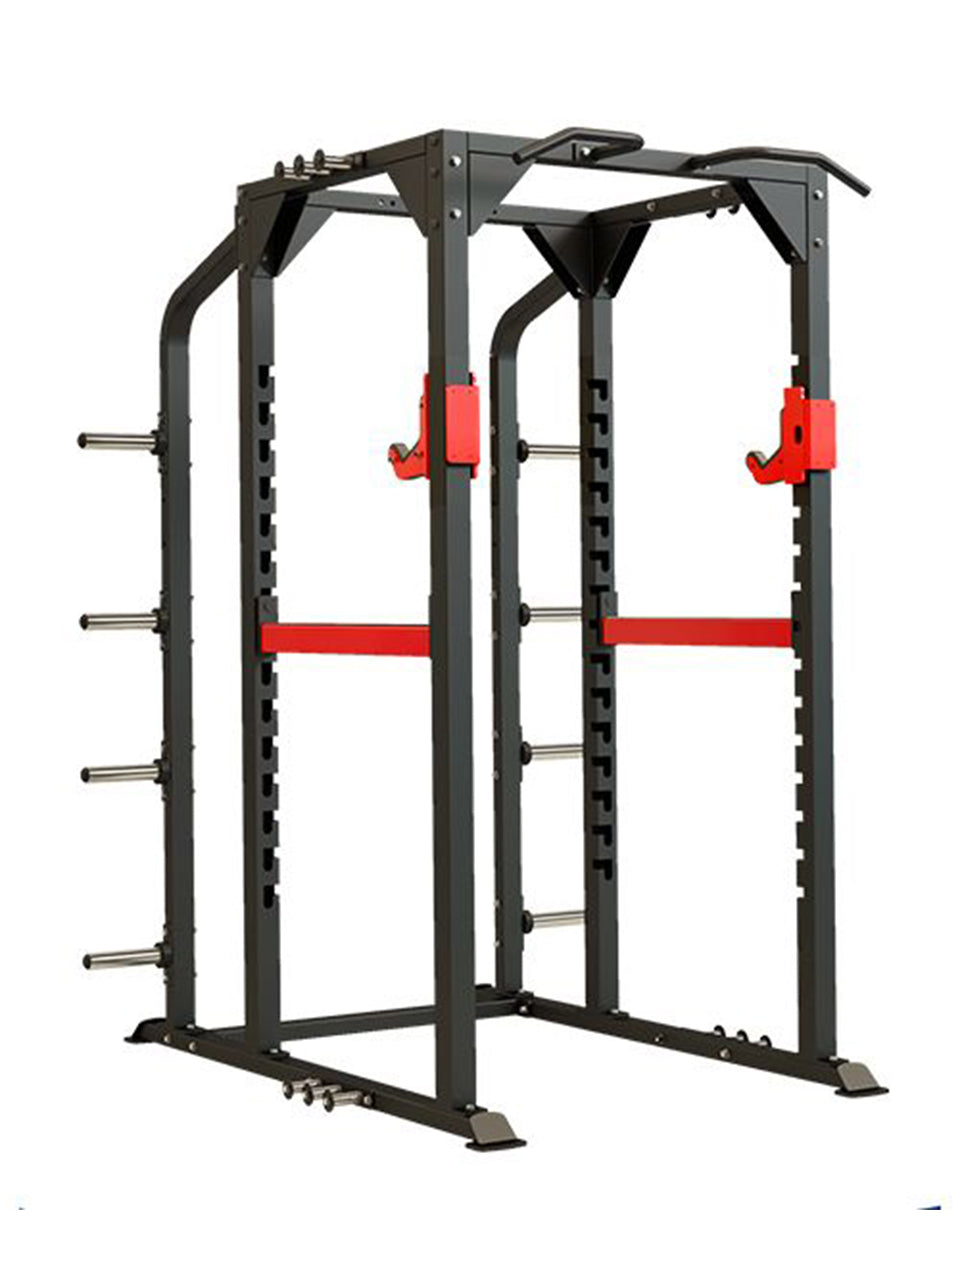 Insight Fitness DH020 Power Rack